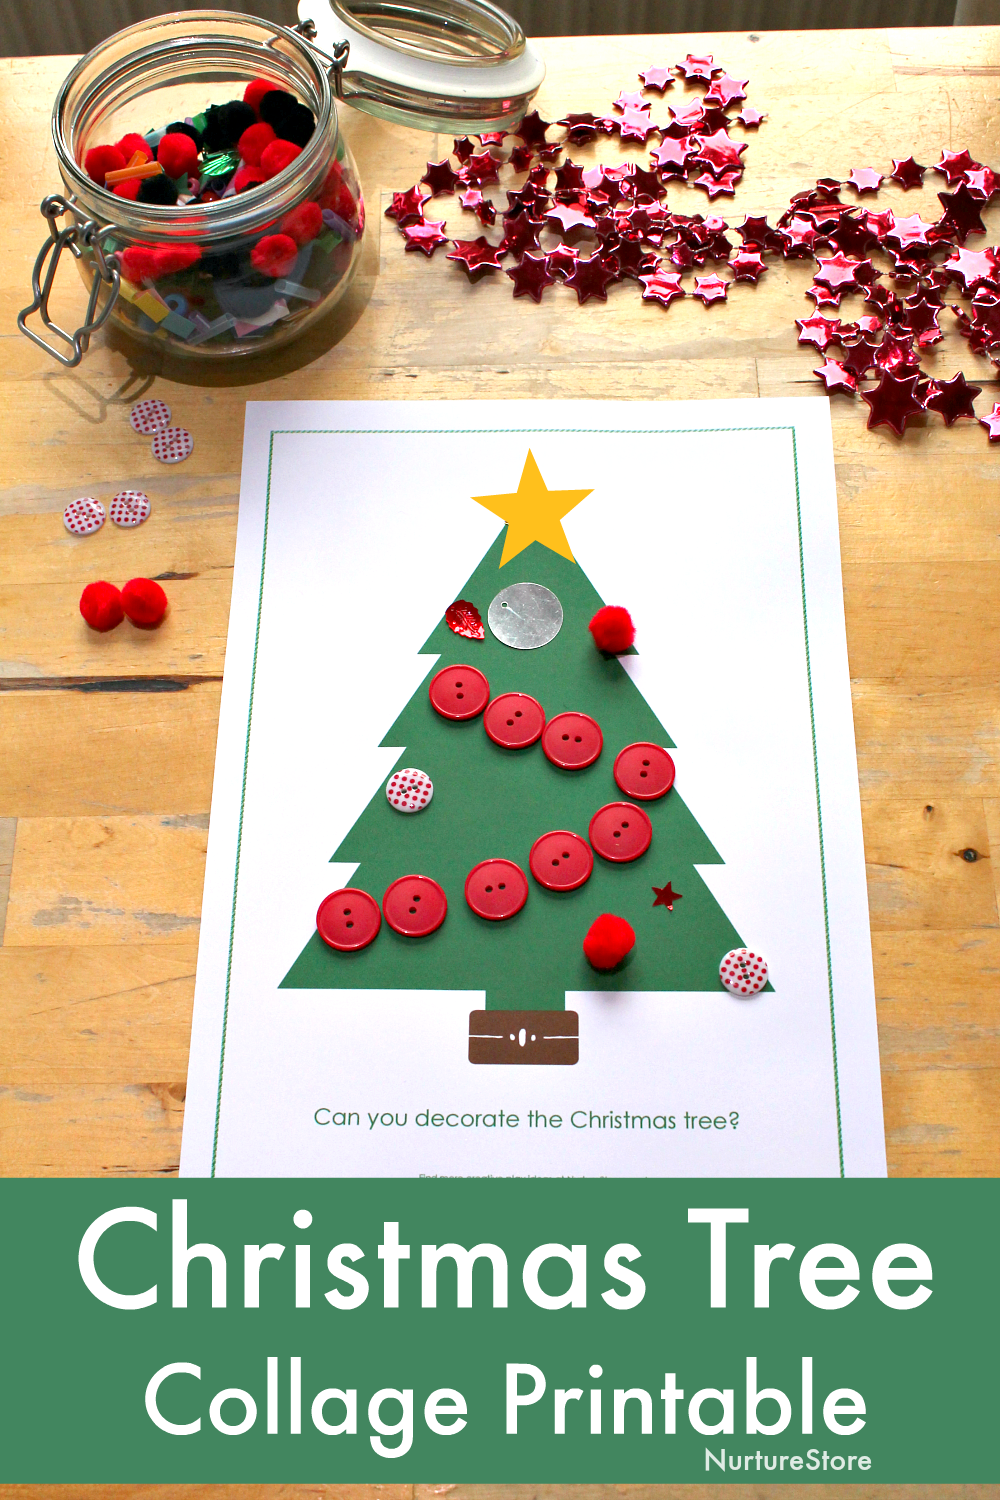 Stained glass Christmas tree colouring in sheet - NurtureStore